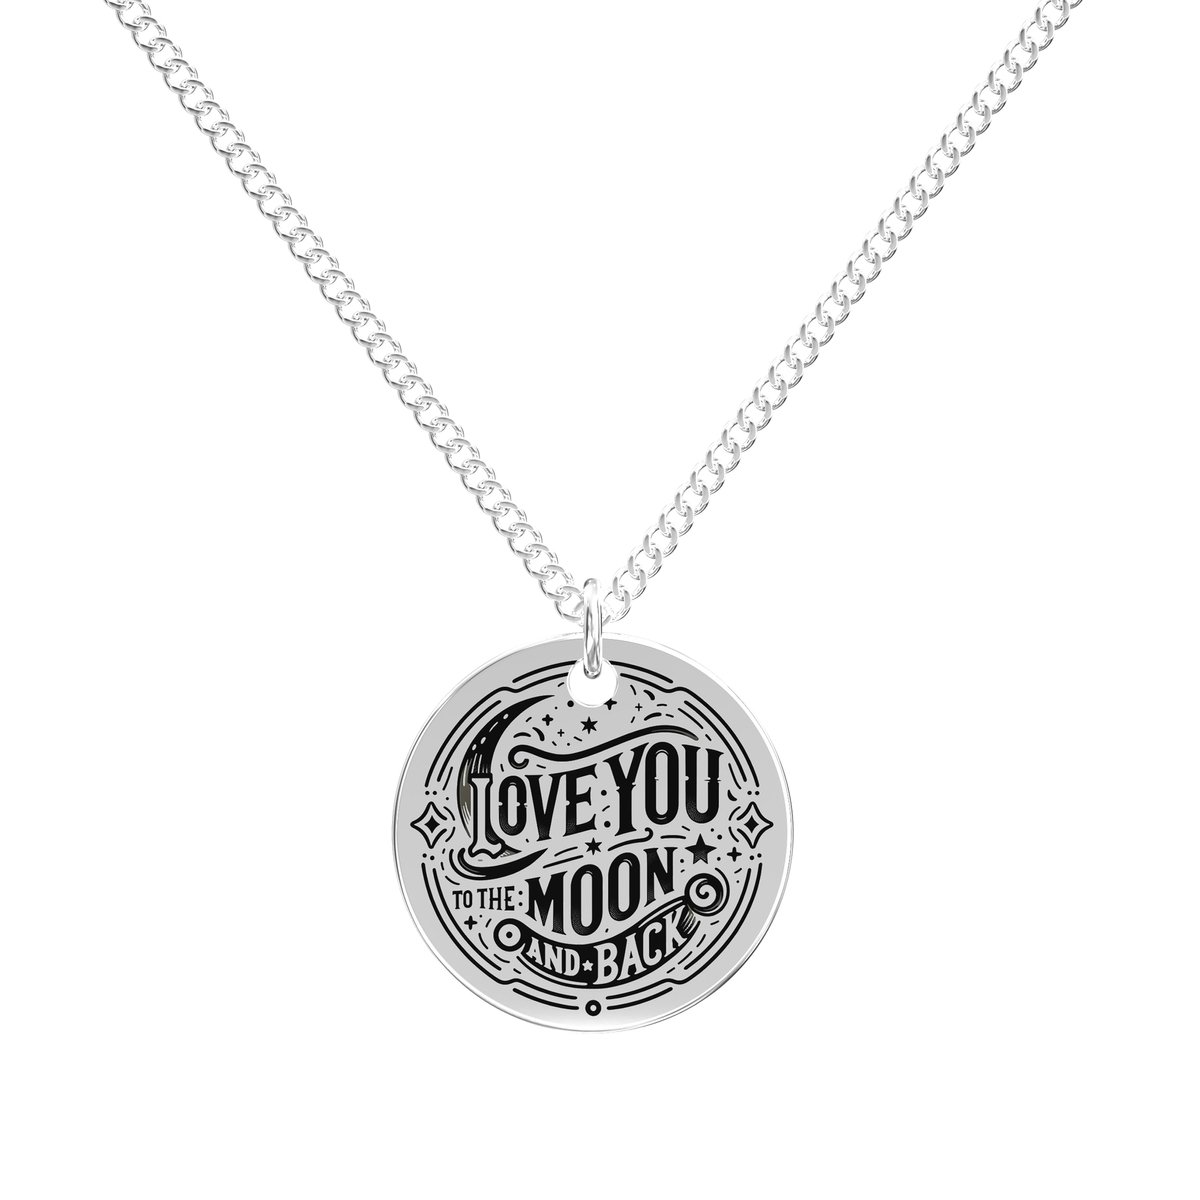 I Love You to the Moon and Back - Zilver verguld - cadeau vriendin- Romantisch Sieraad